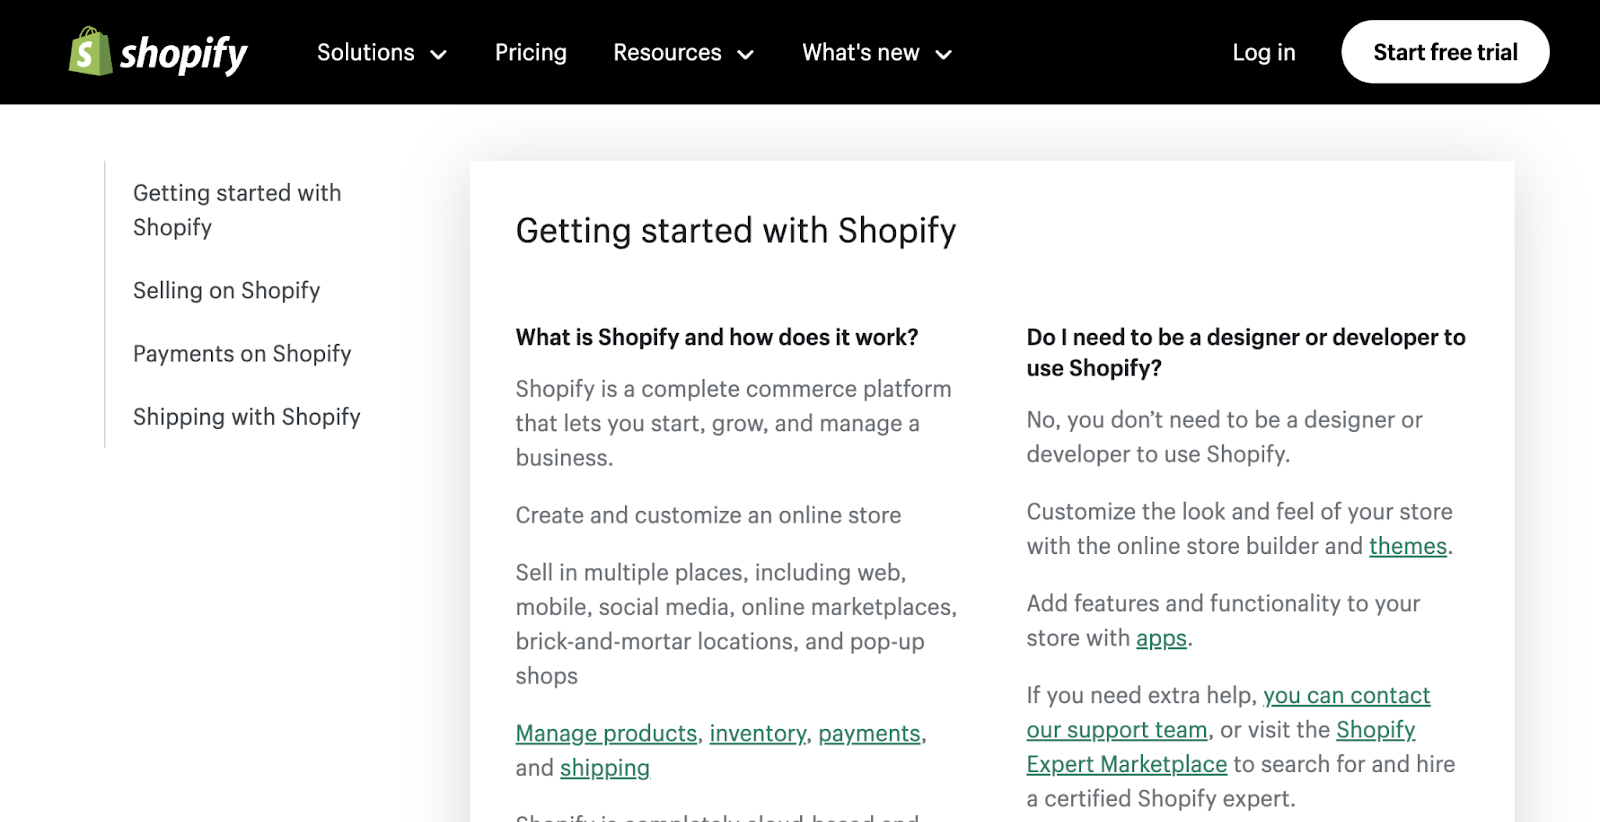 Shopify faq page has sections for getting started, selling, payments, and shipping